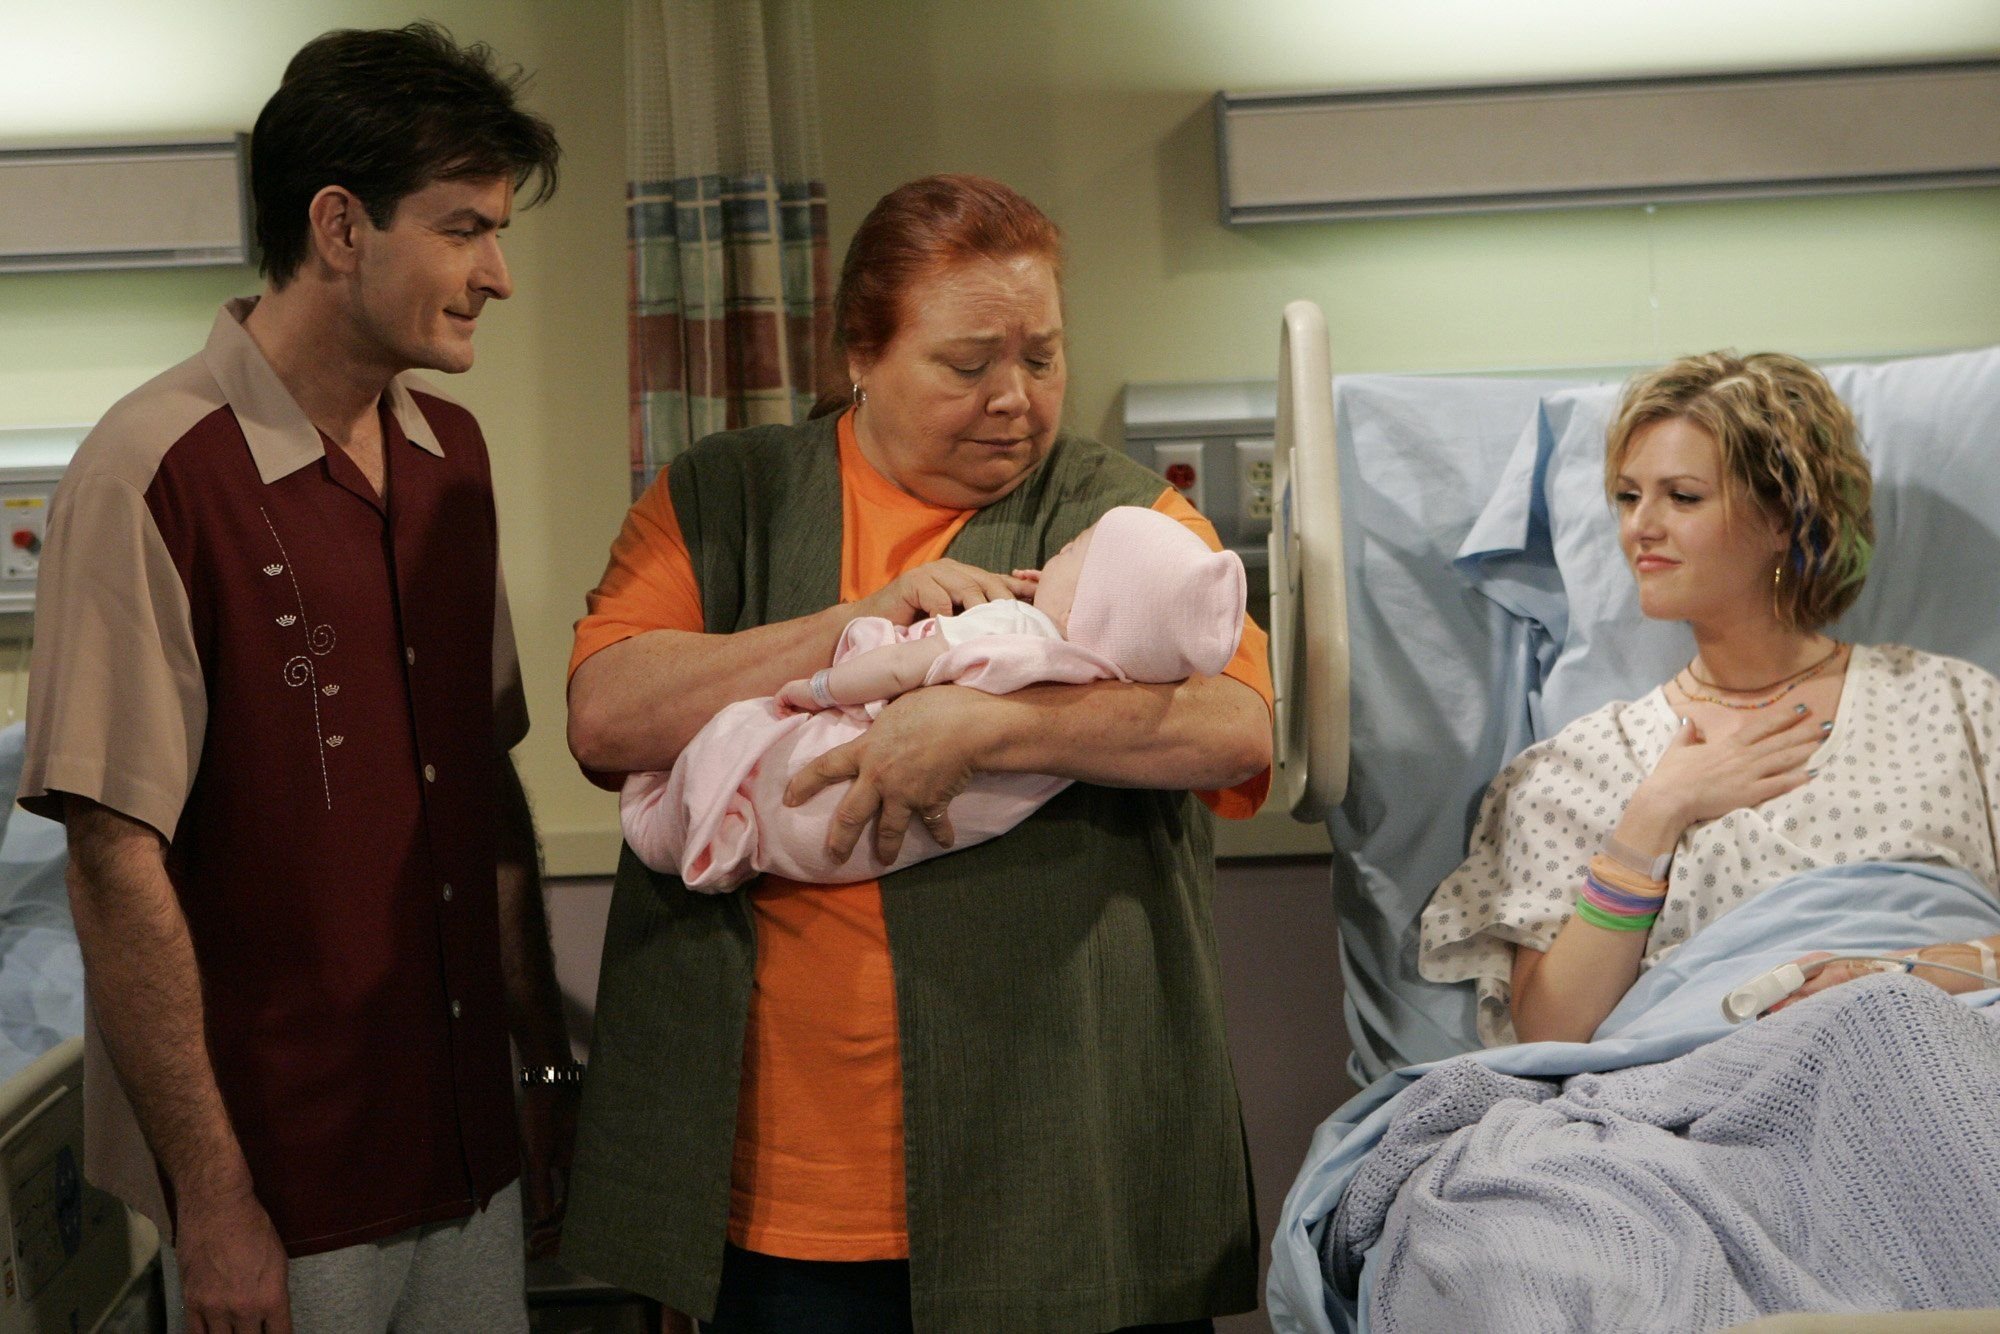 Conchata Ferrell and Charlie Sheen during a scene in an episode of "Two and a Half Men" | Source: Getty Images